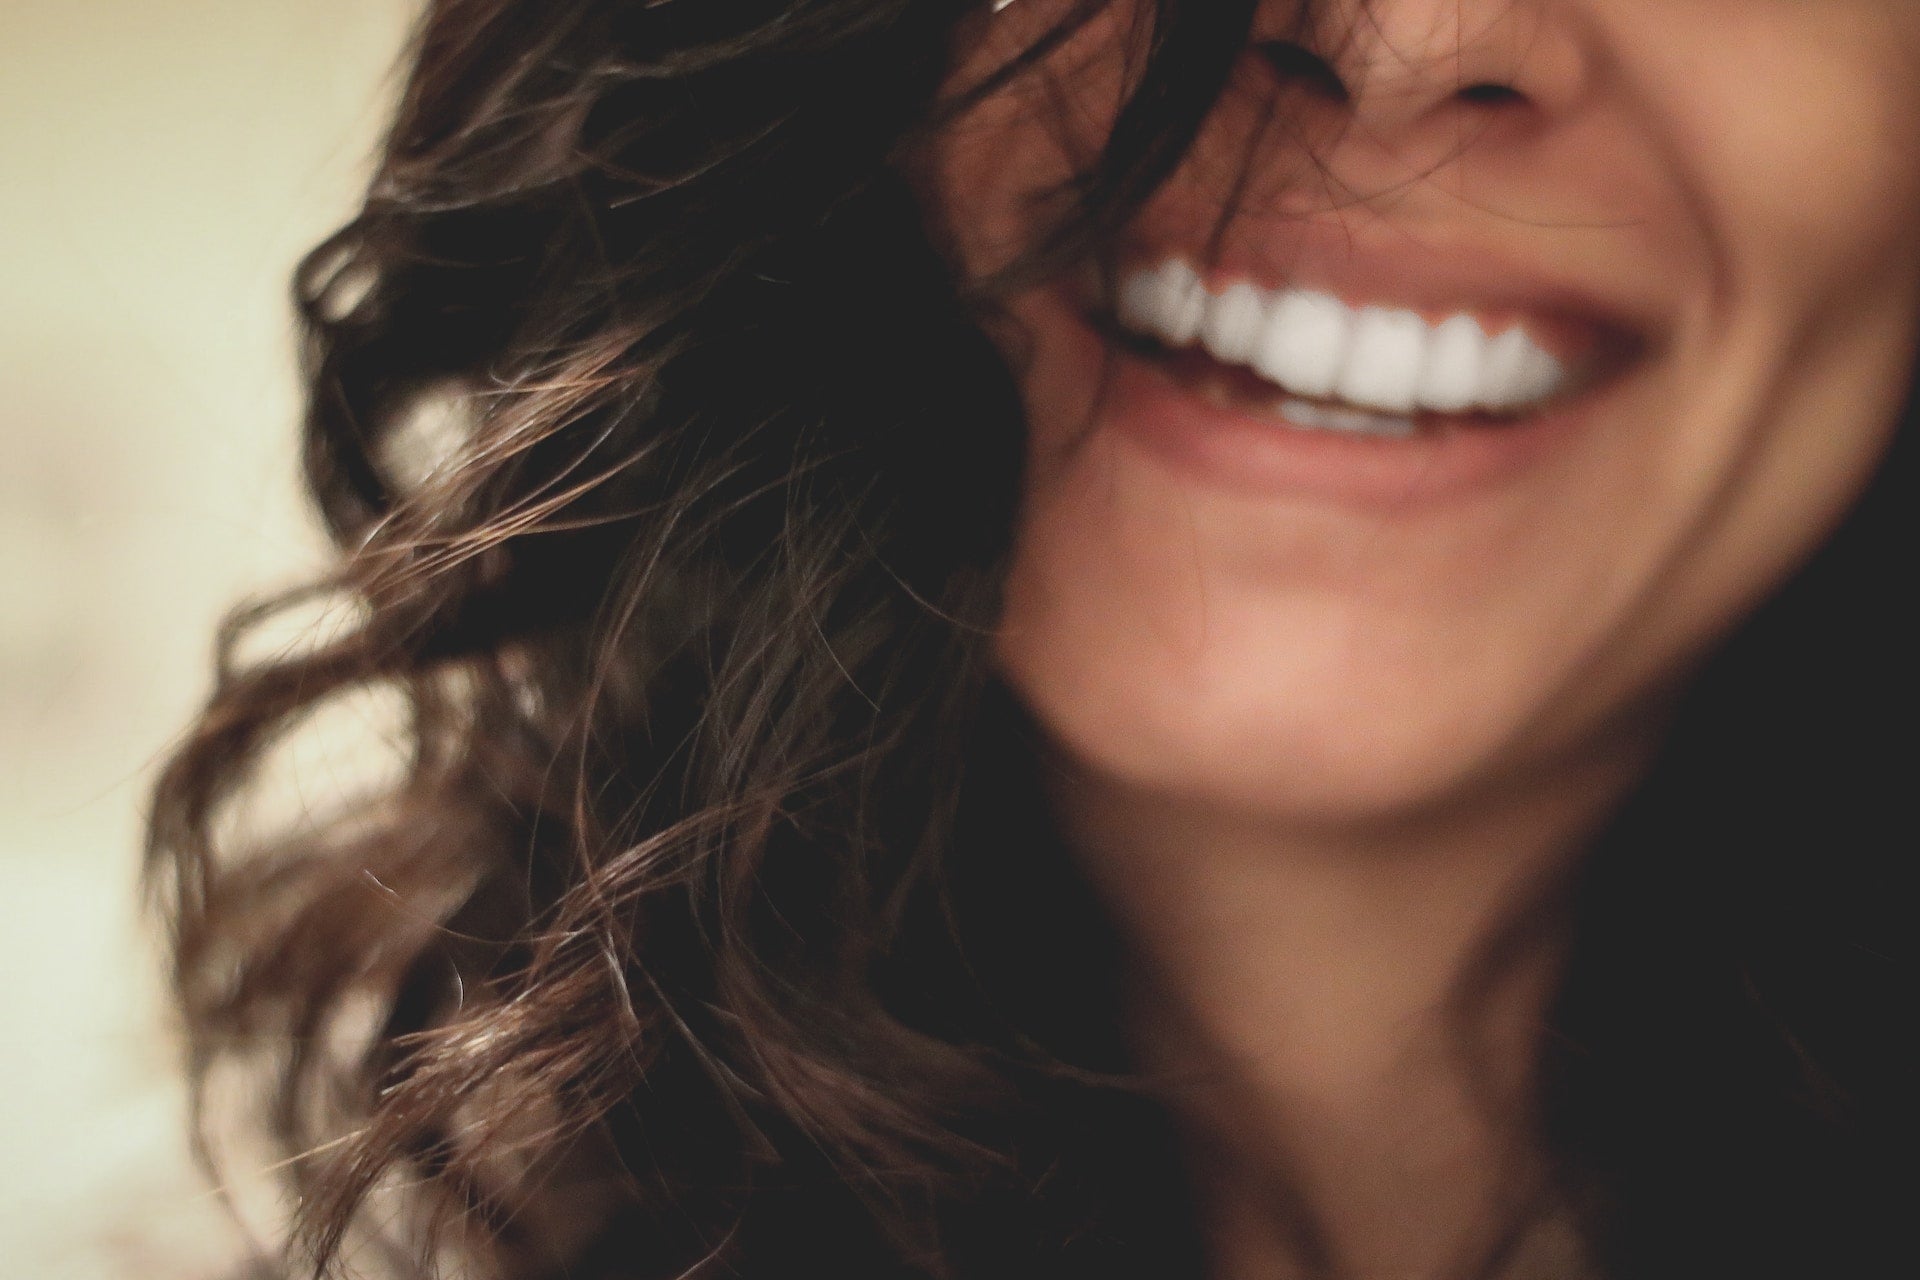 close-up image of a woman smiling.